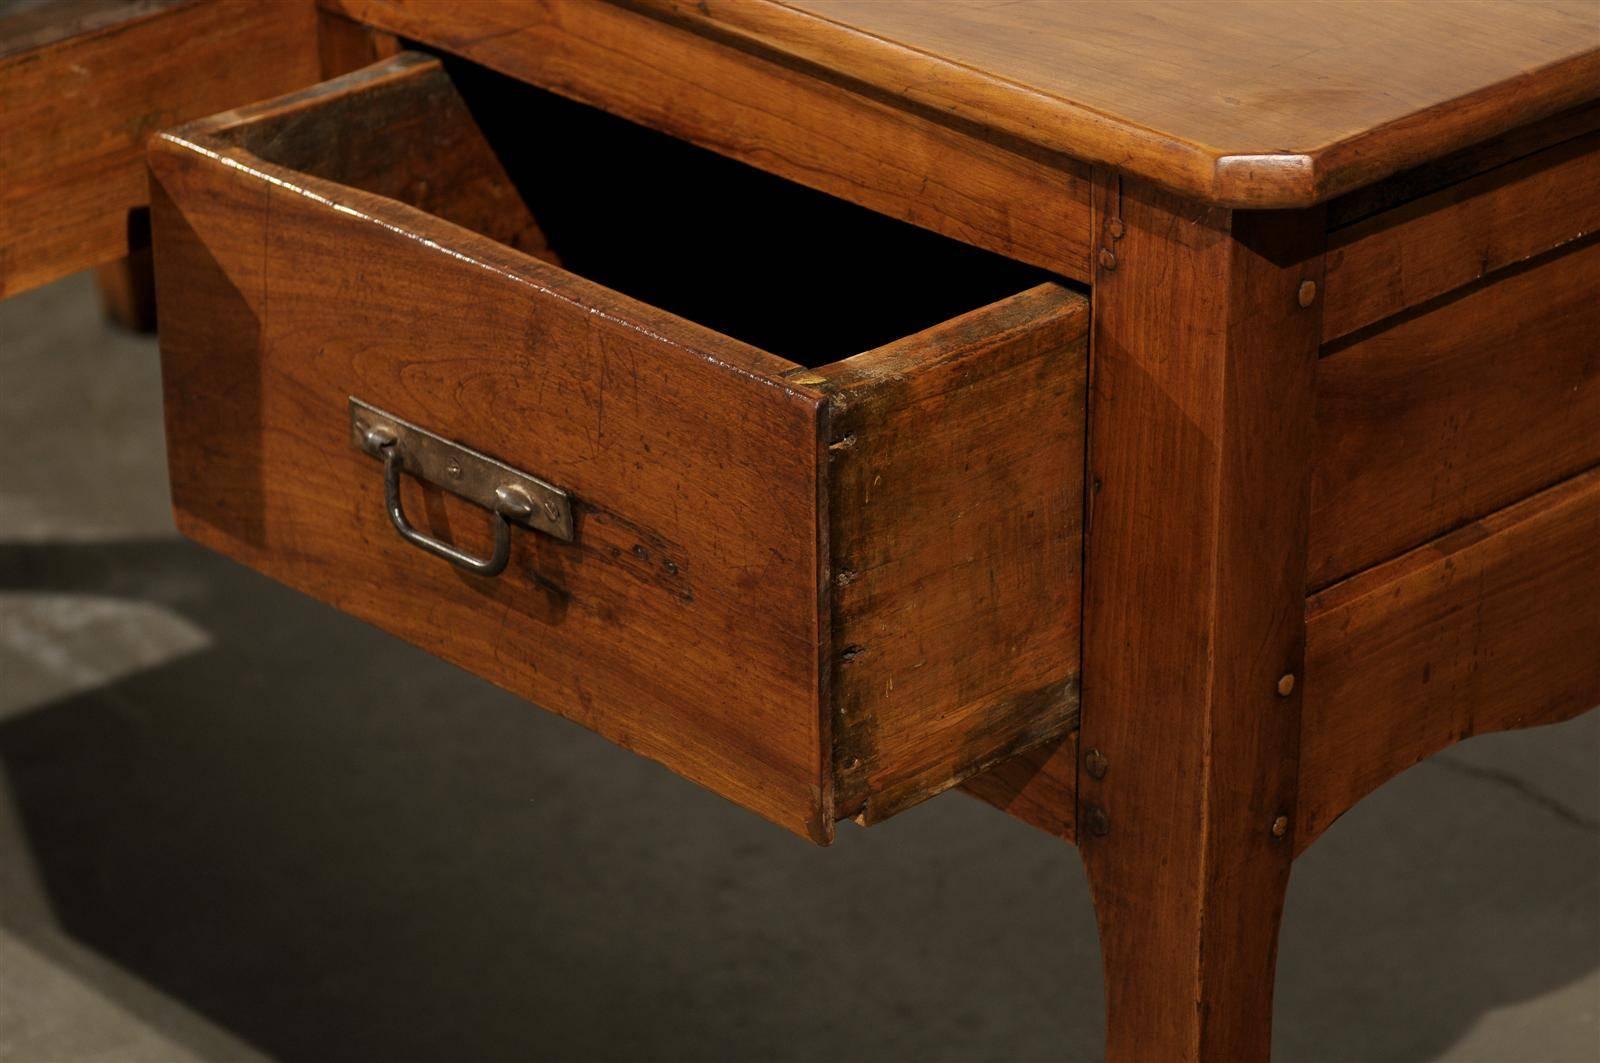 Wood 18th-19th Century French Provincial Fruitwood Desk